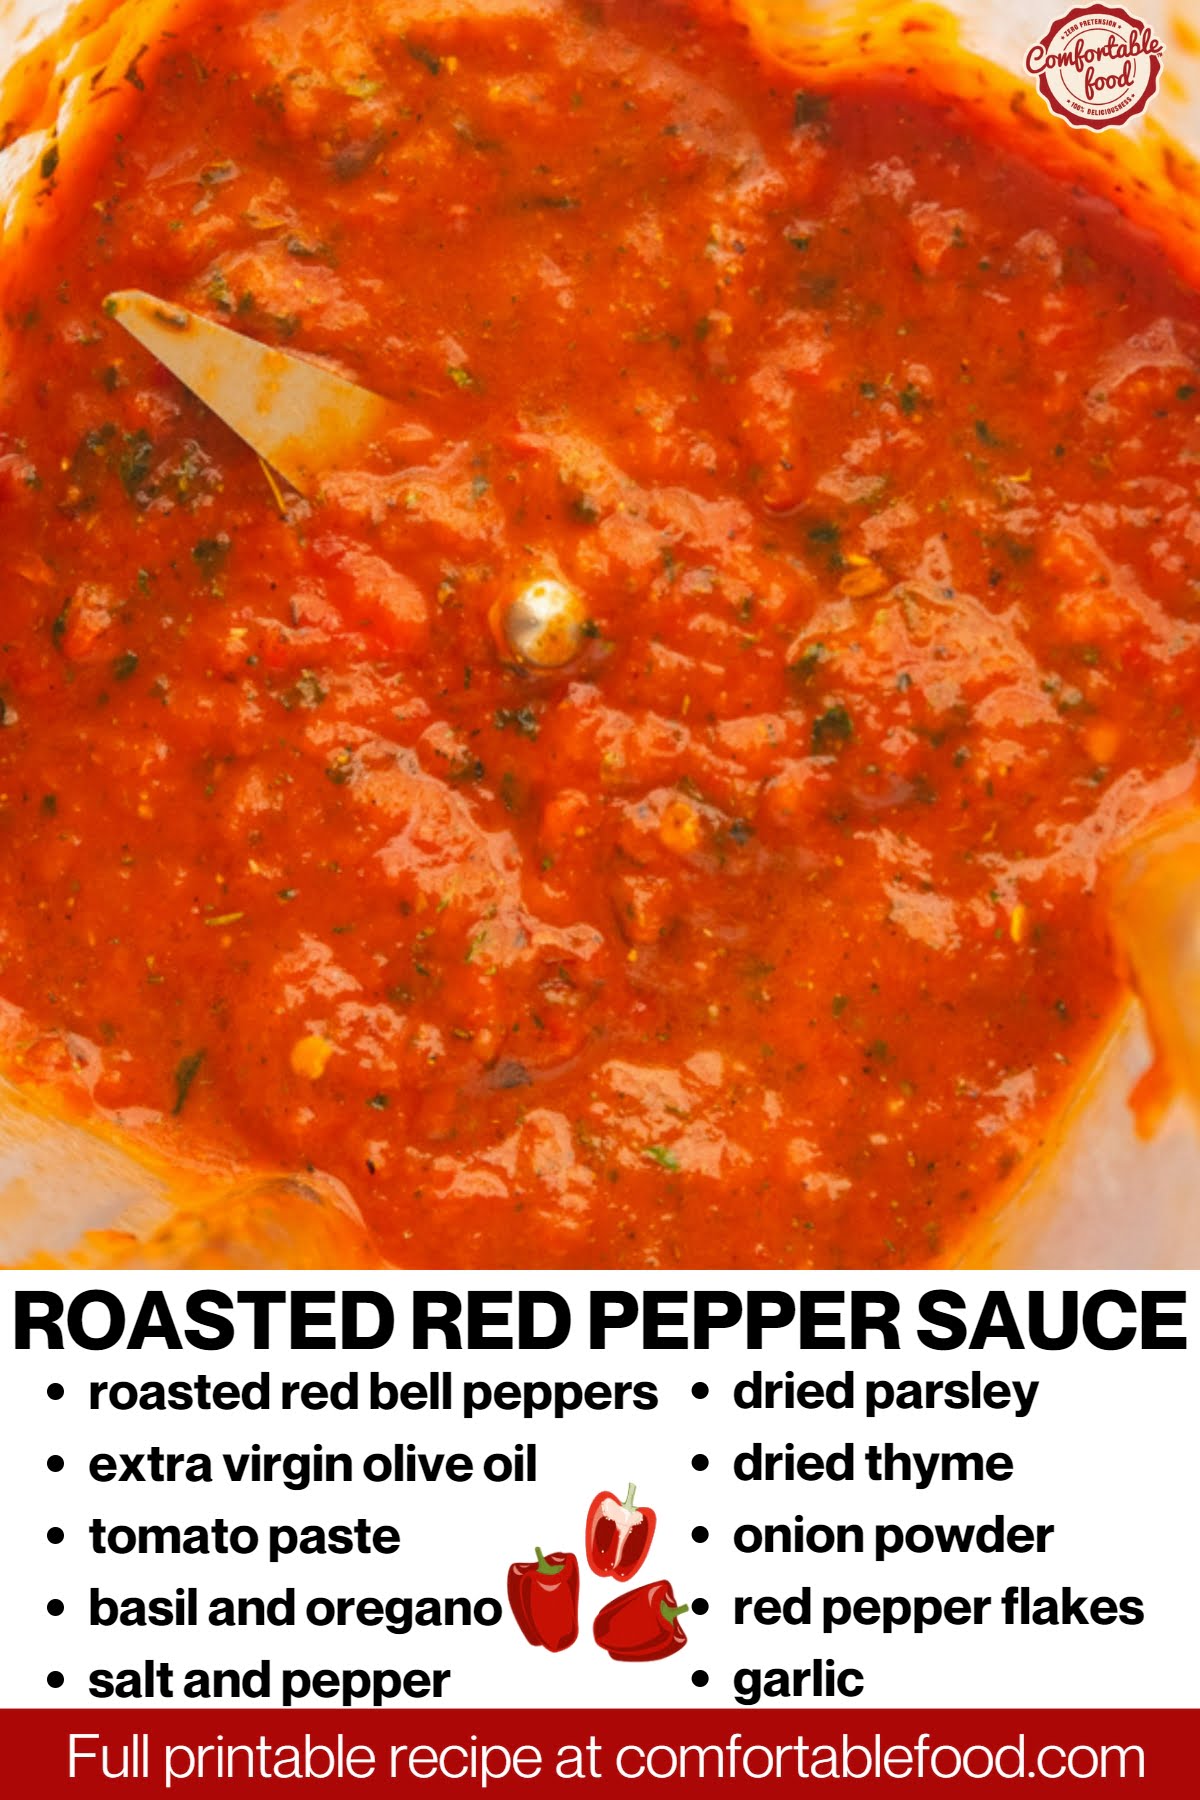 Roasted red pepper sauce - socials 2